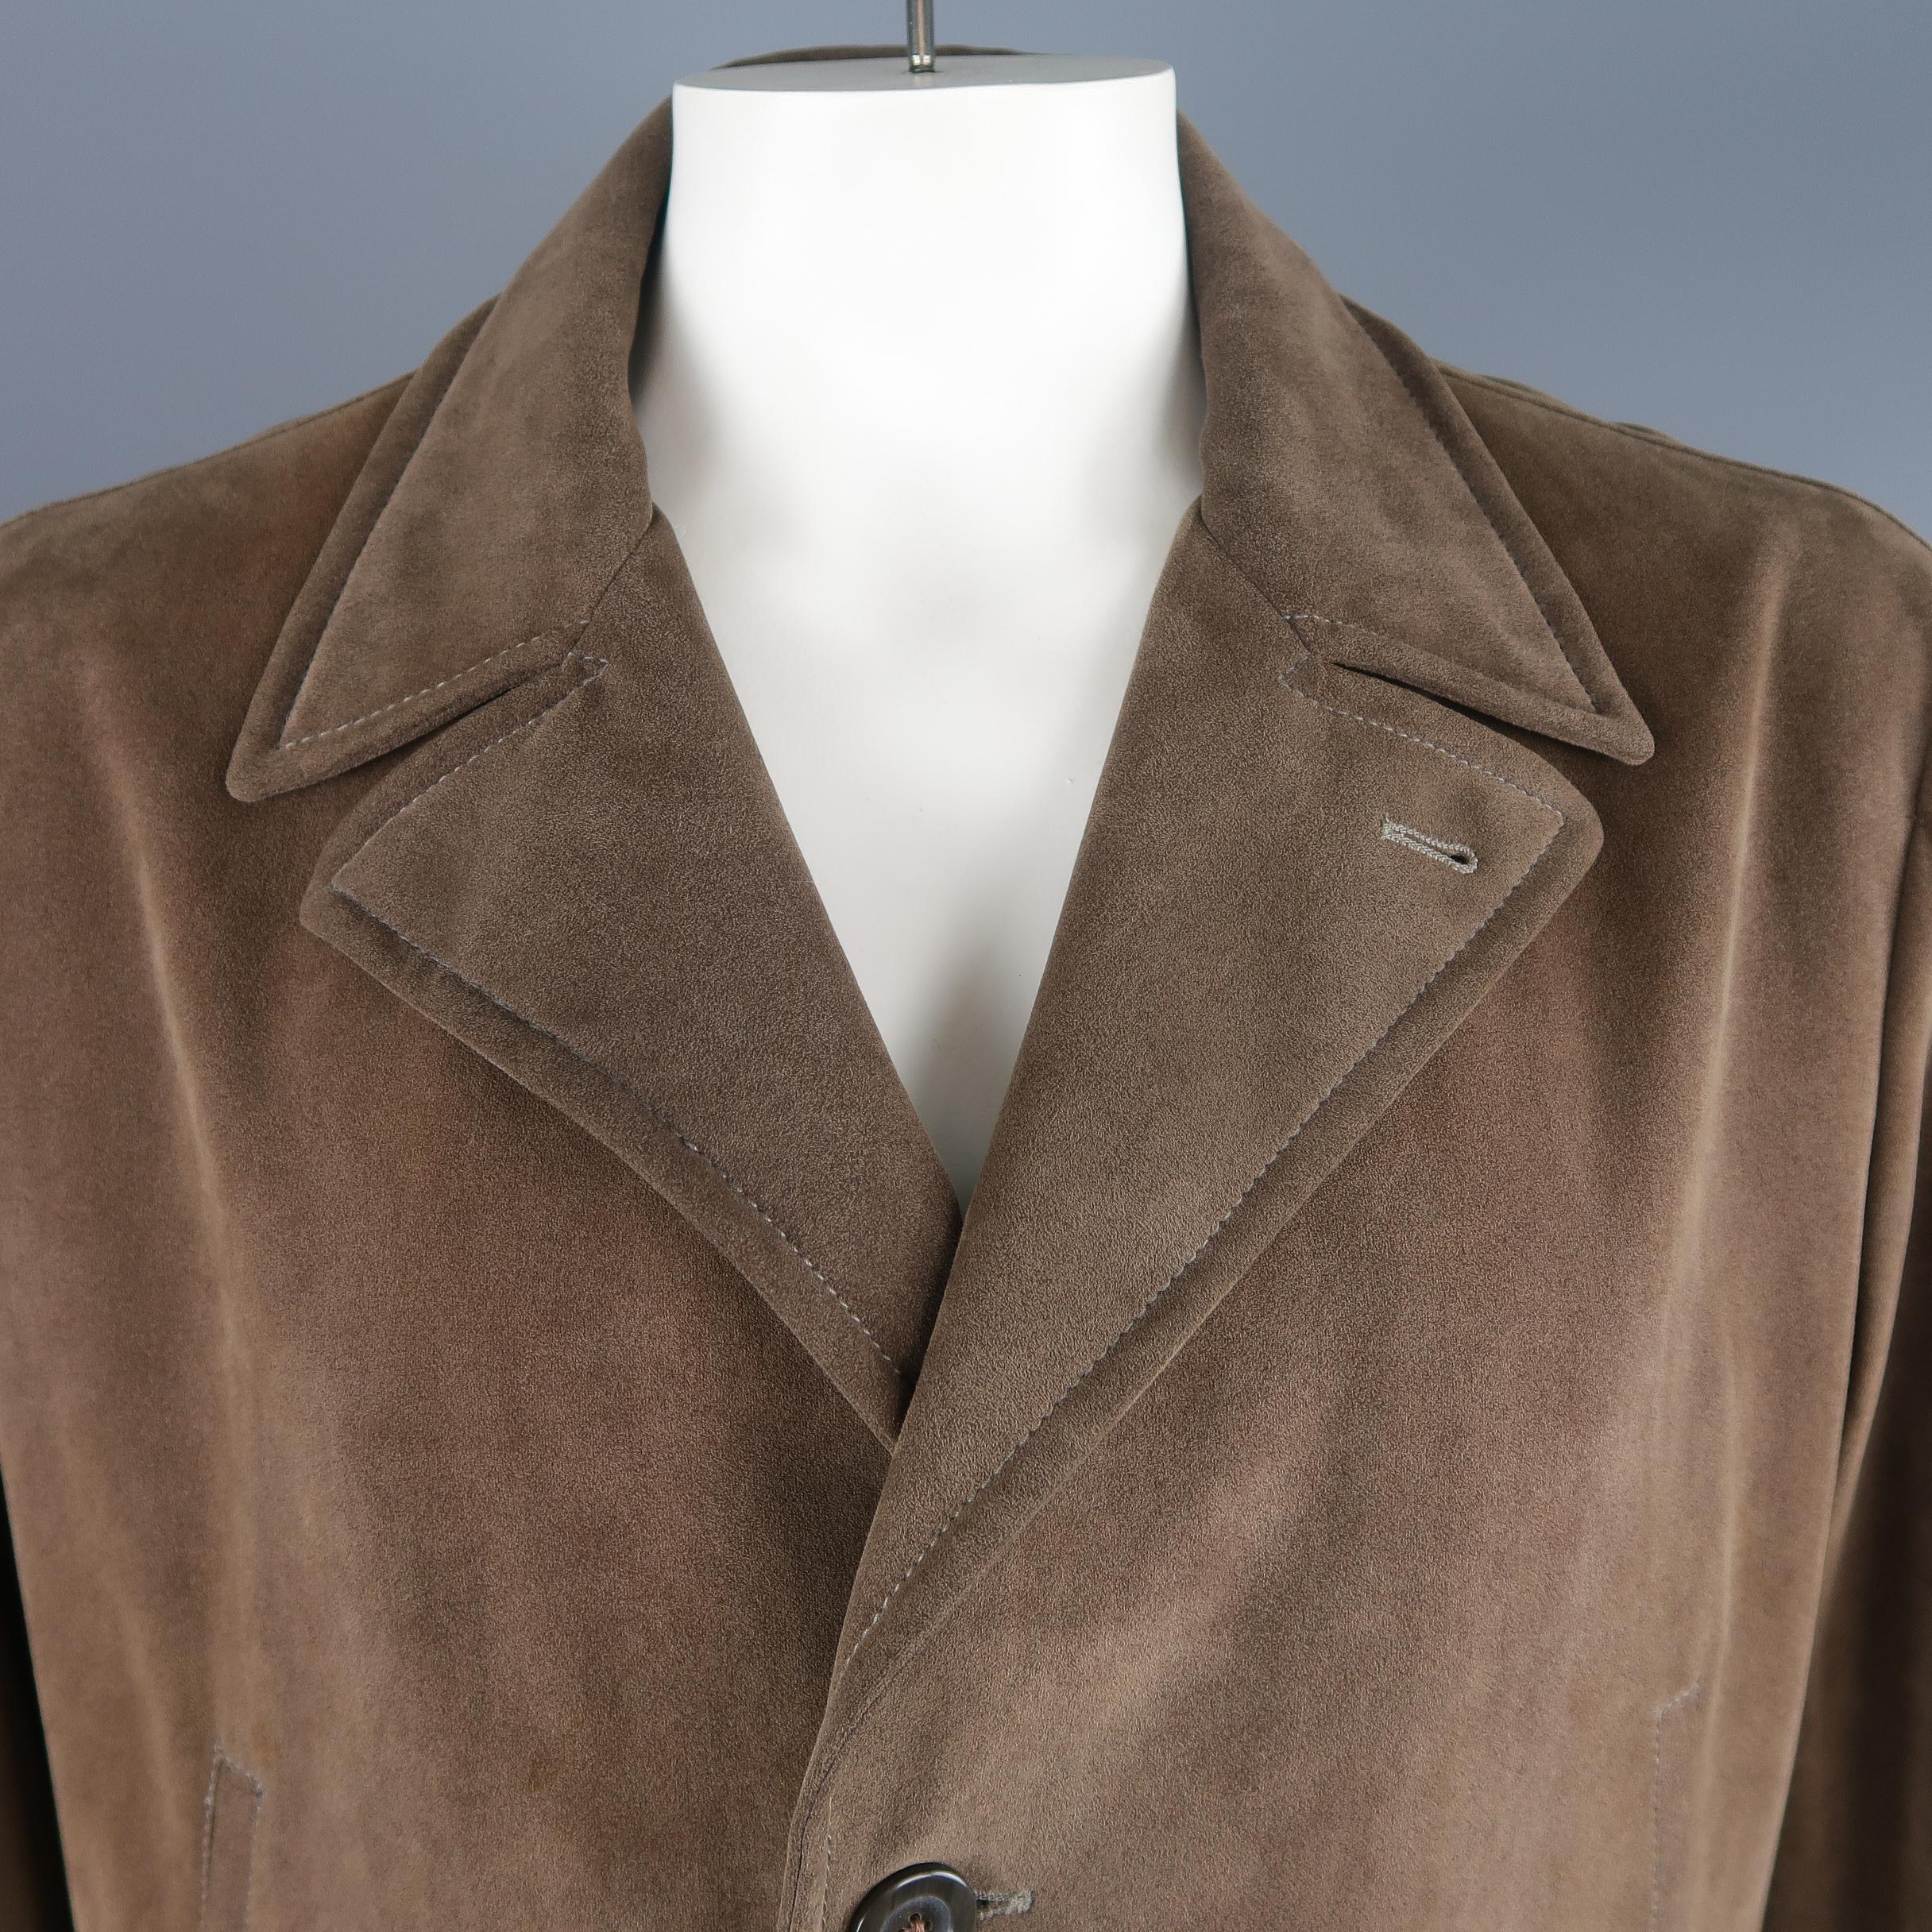 Armani Collezioni coat comes in taupe microsuede with a pointed lapel, three button front, slanted, zip, and flap pockets, and tab cuffs. Wear consistent with age. Made in Italy.
 
Good Pre-Owned Condition.
Marked: IT 56
 
Measurements:
 
Shoulder: